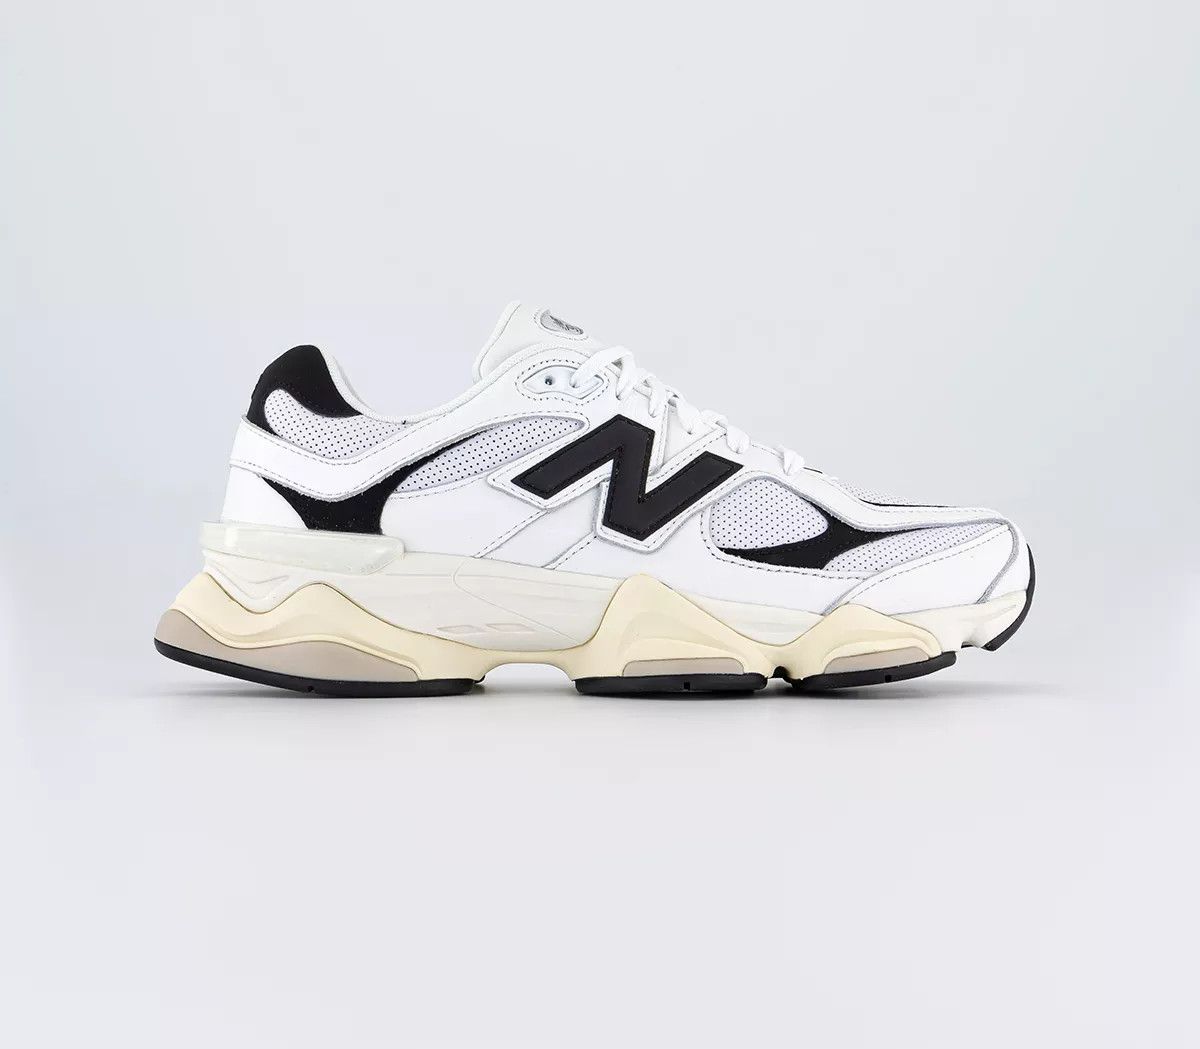 New Balance 9060 Trainers White Black - Men's Trainers | Offspring (UK)